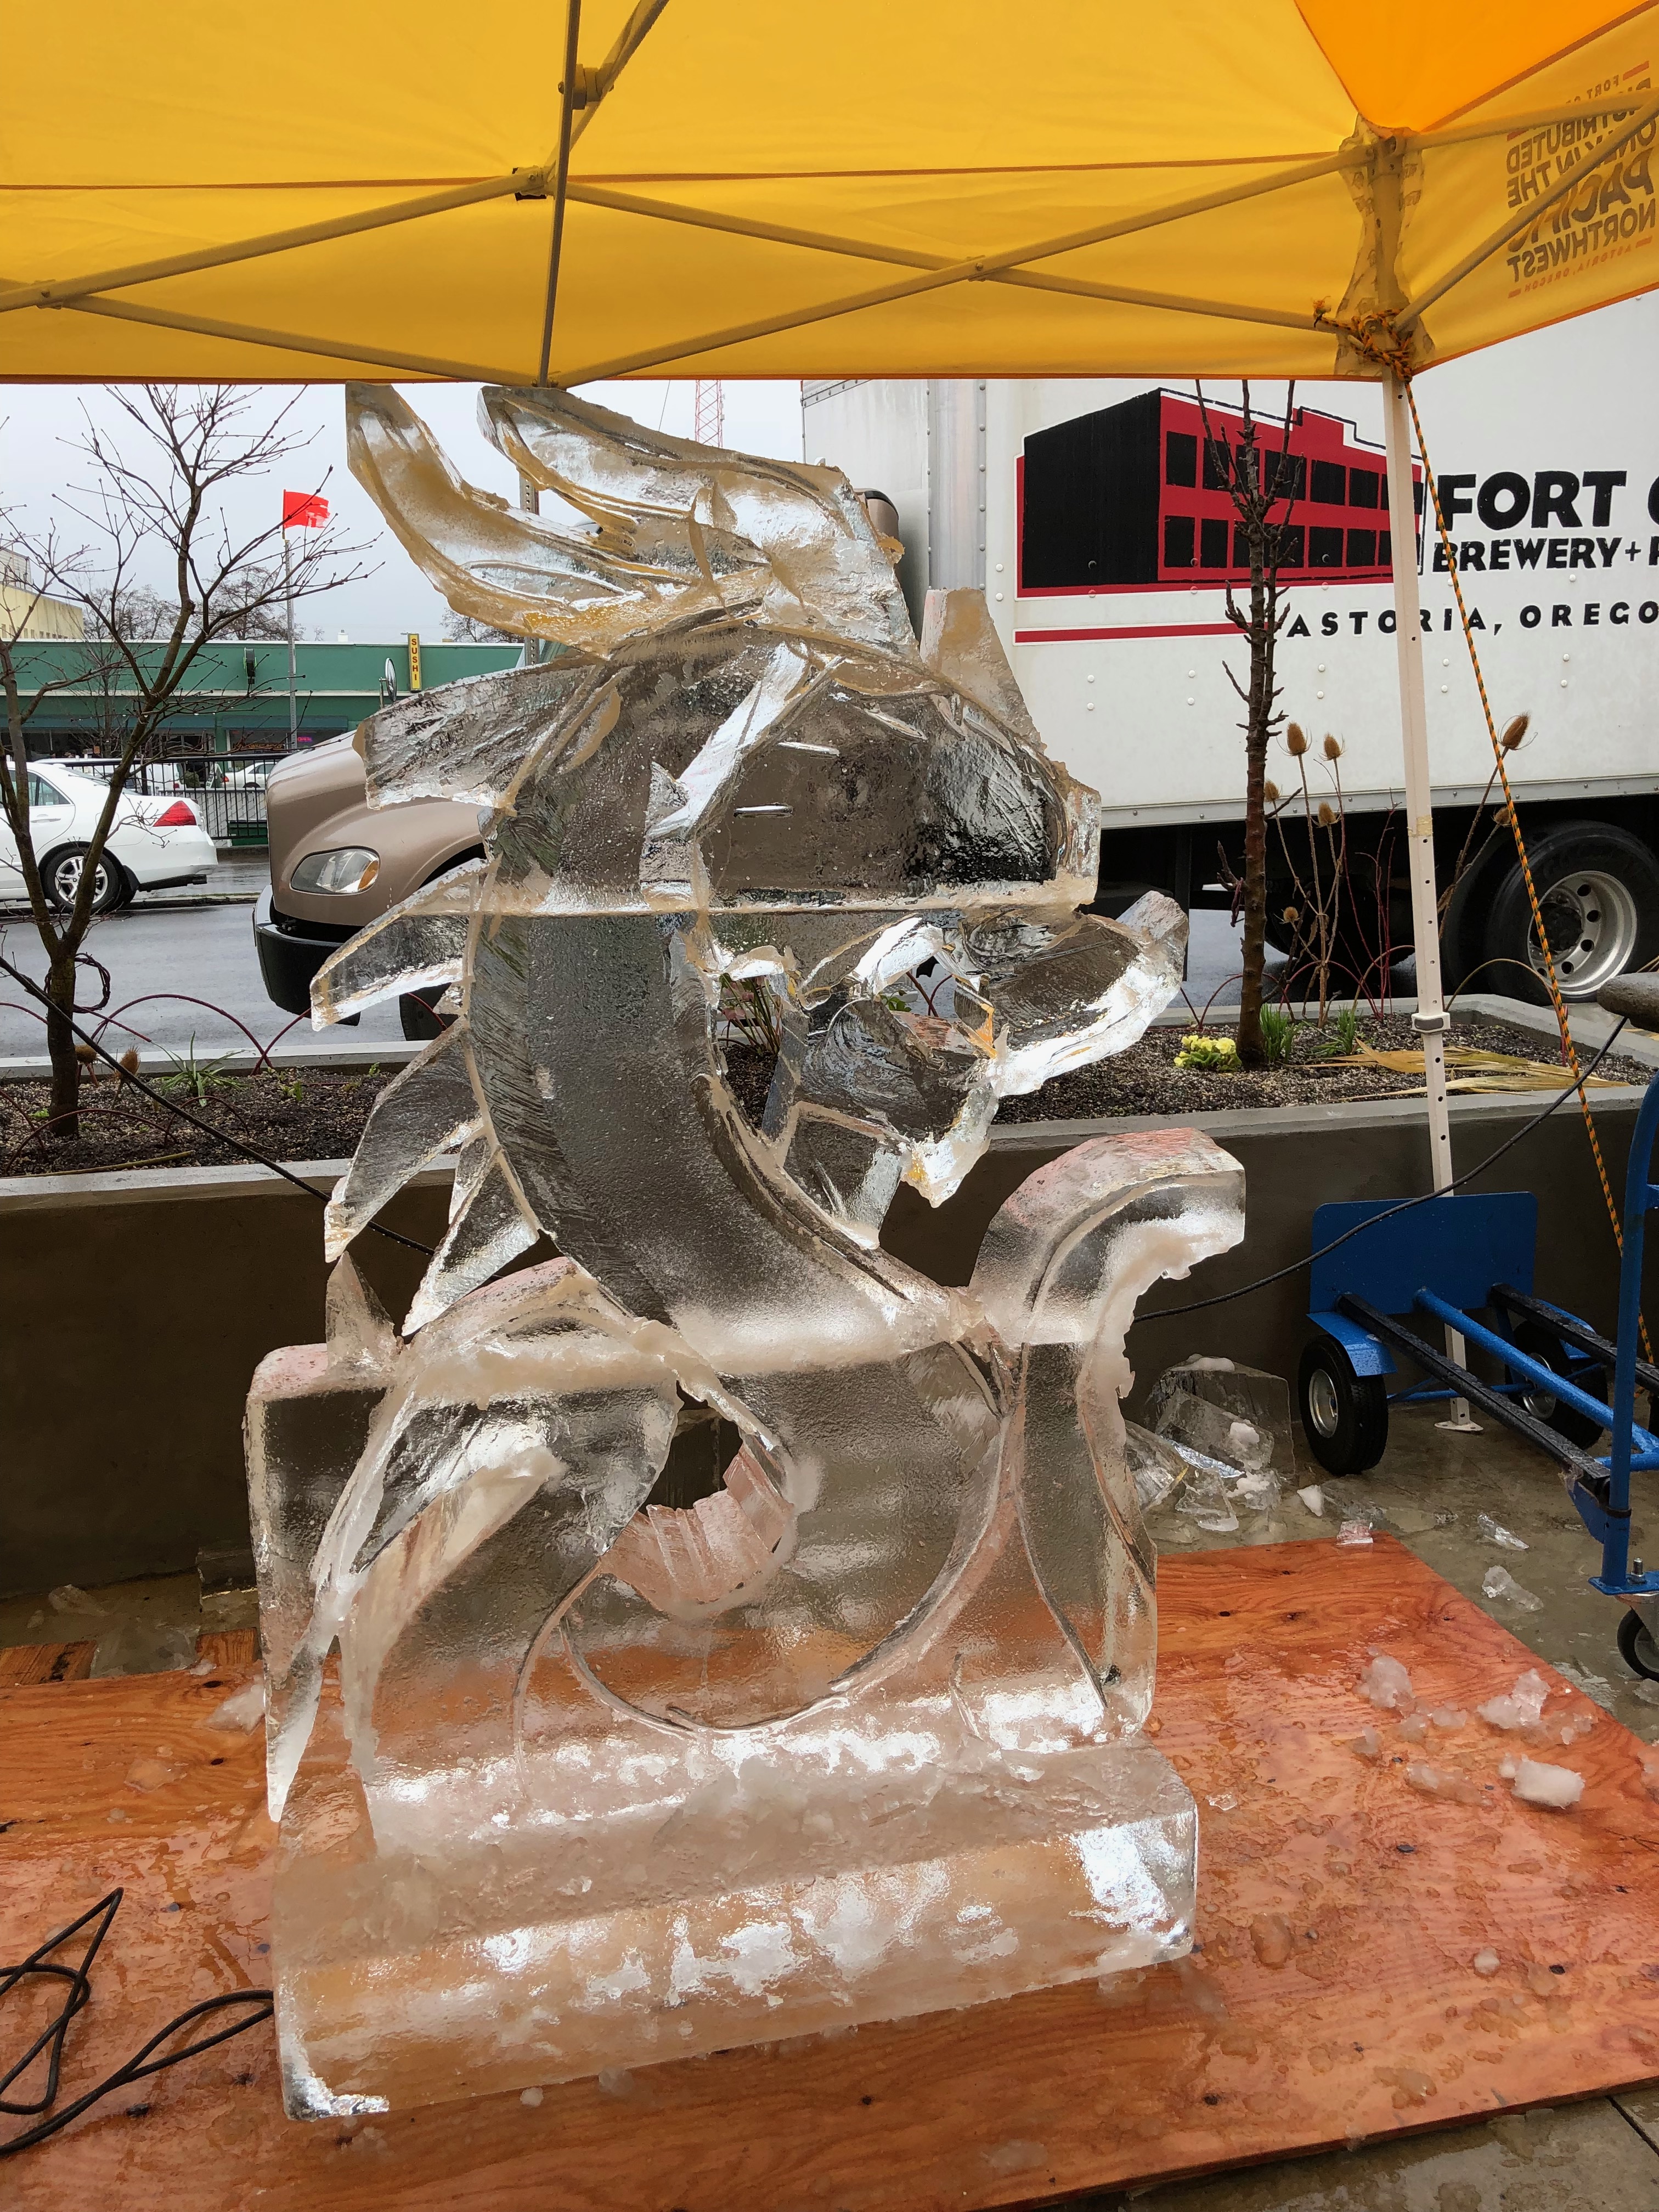 An ice sculpture at the 2018 Festival of Dark Arts at Fort George Brewery.